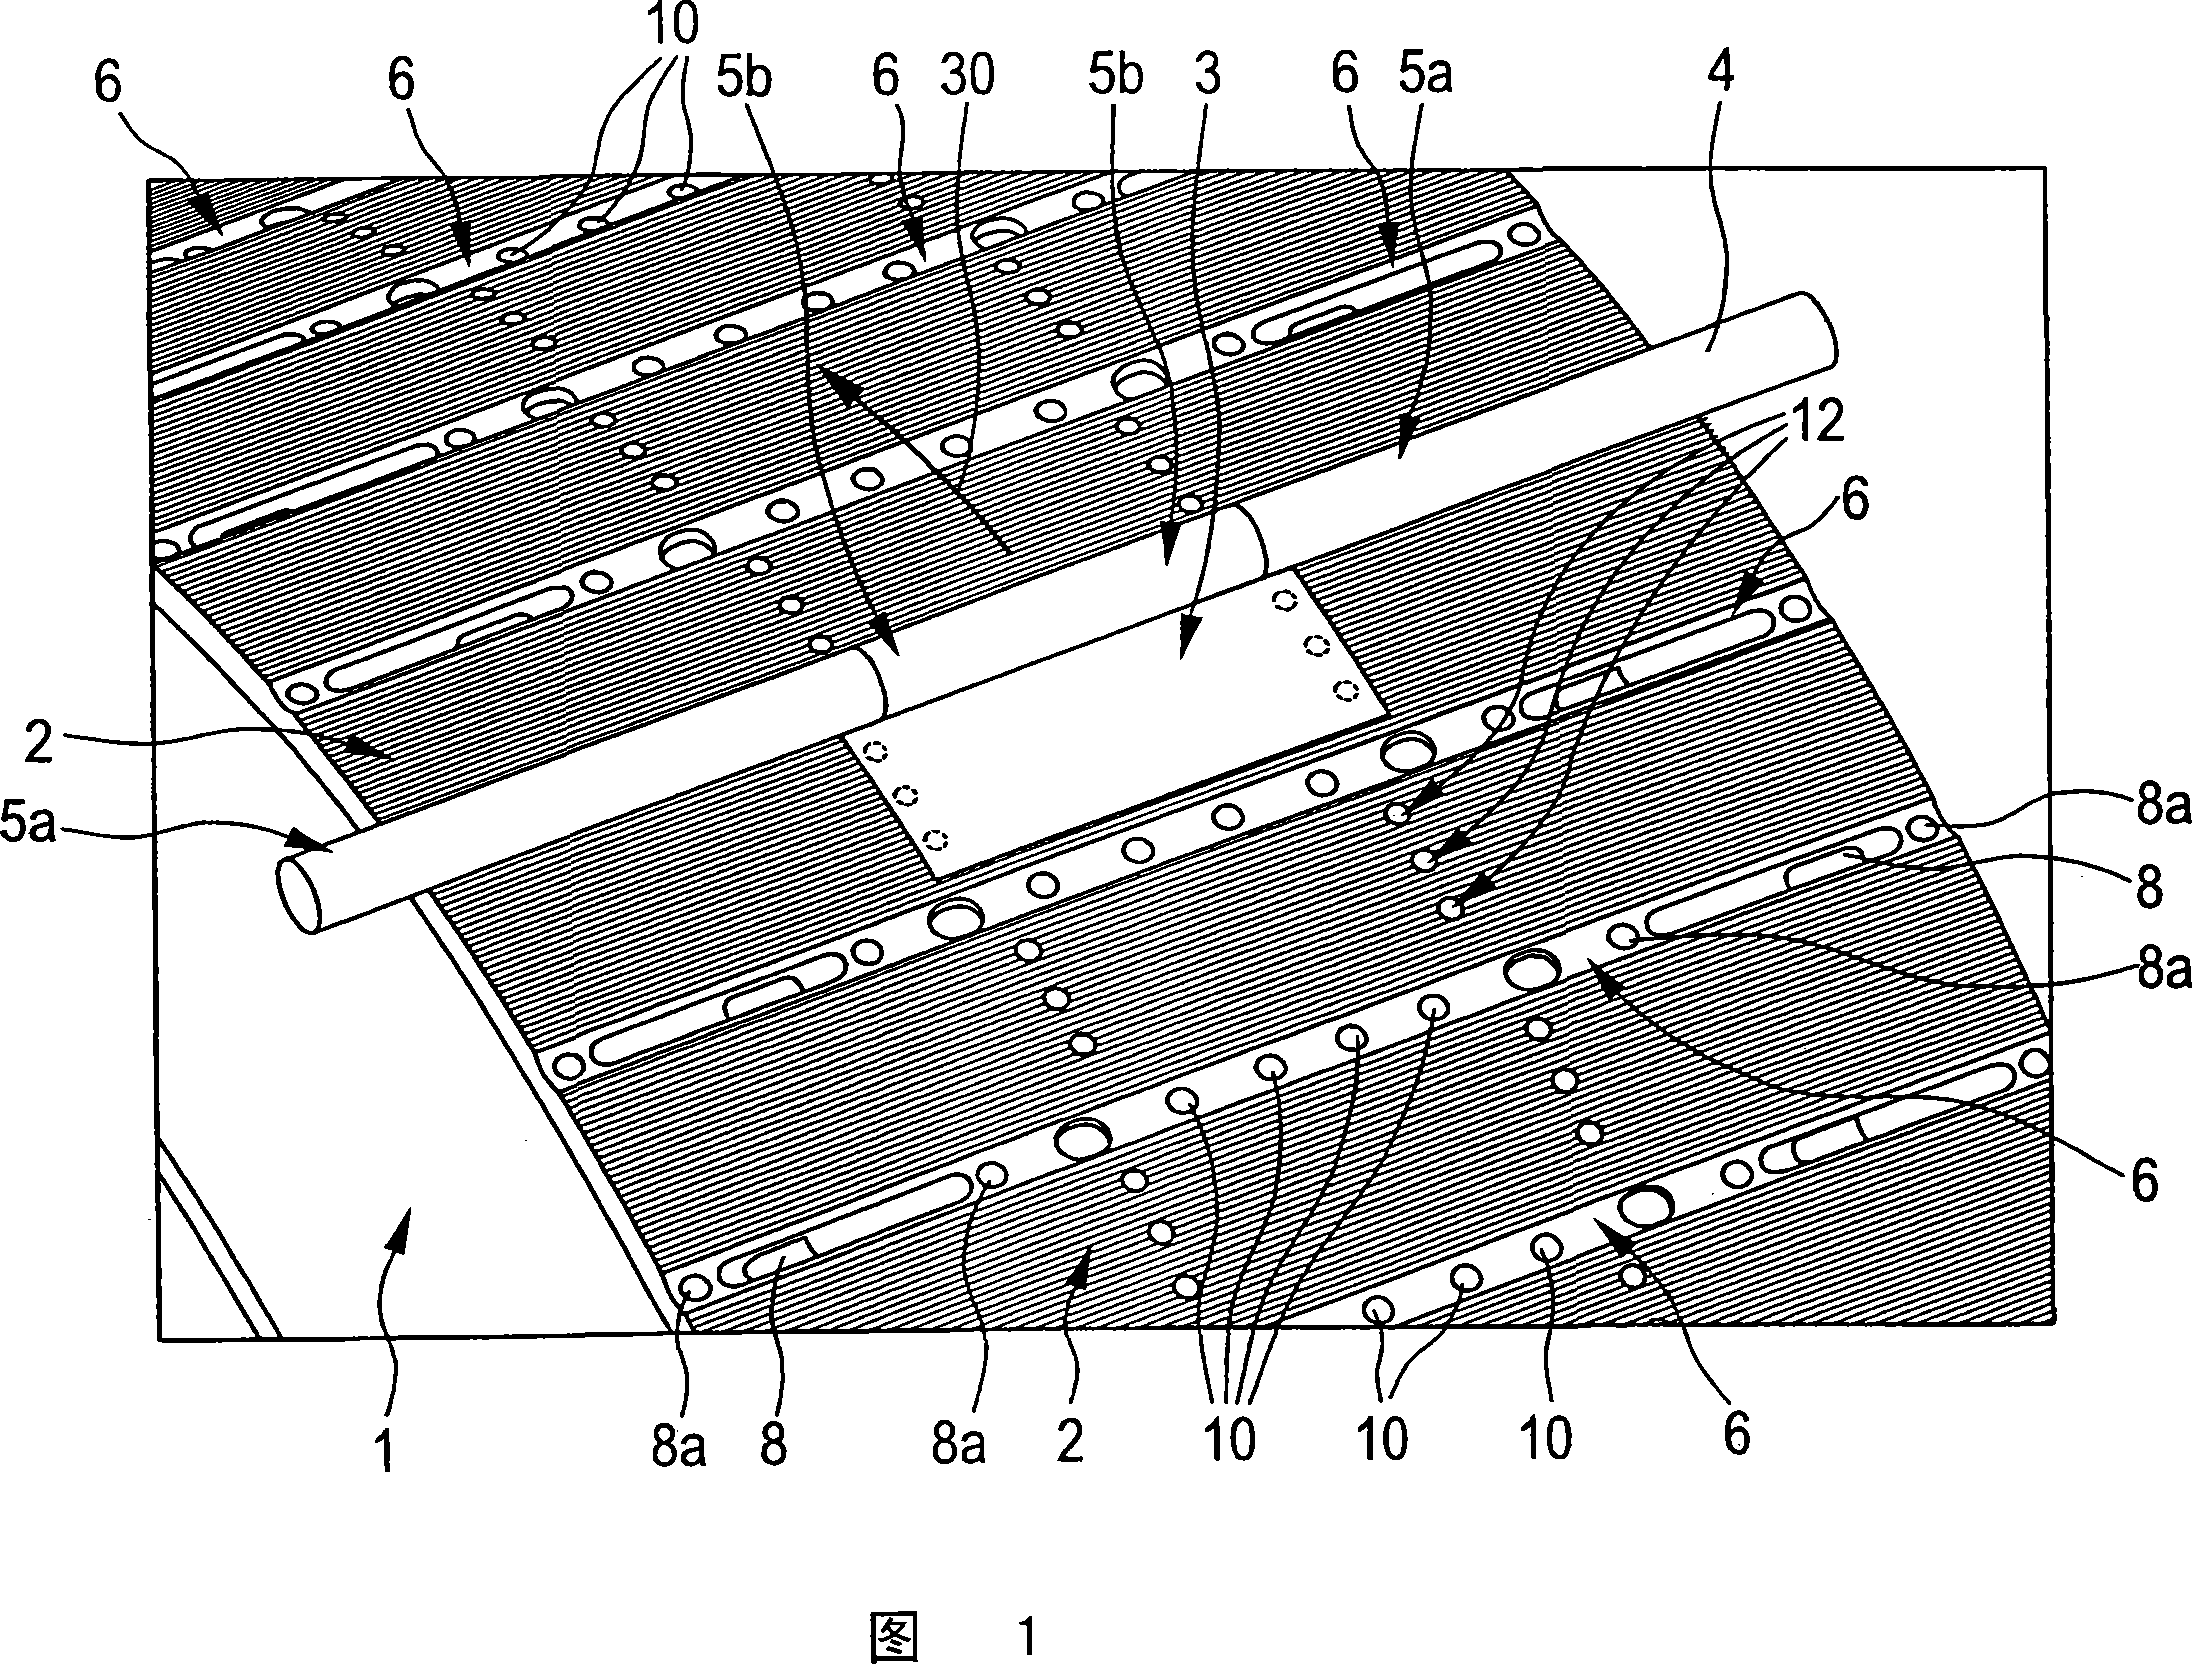 V-shaped assembly of suction apertures